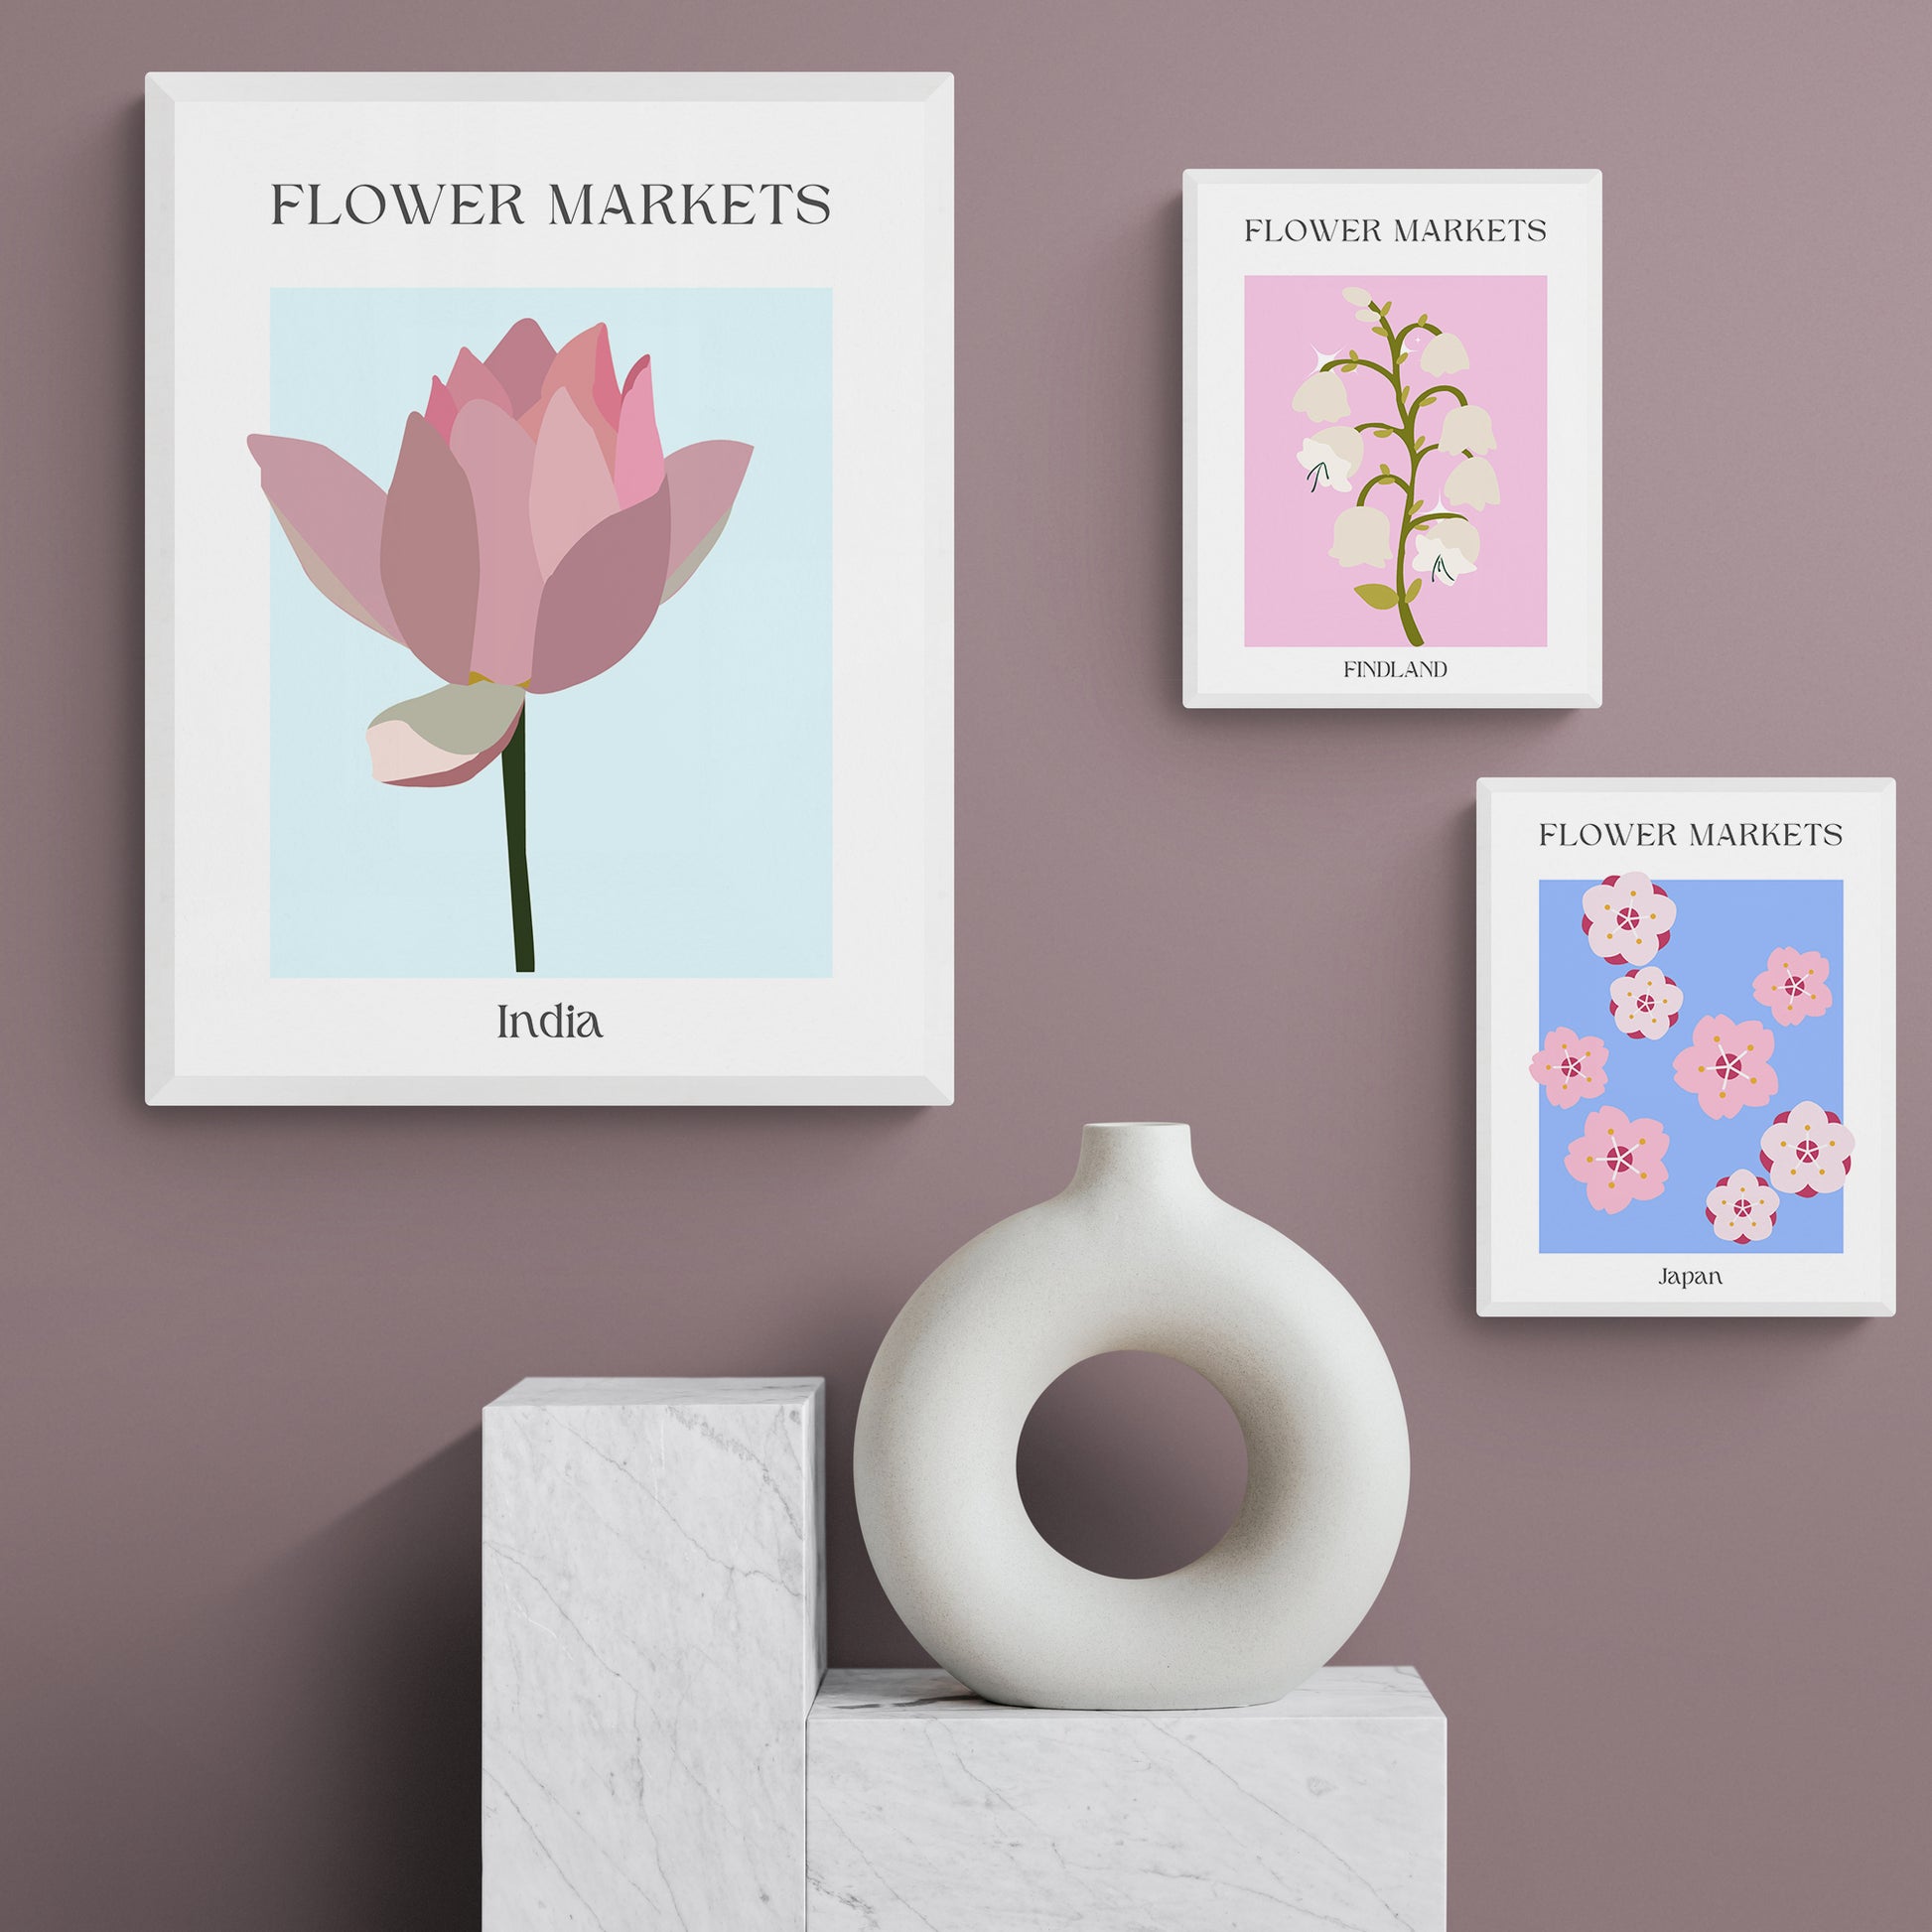 Bring life to your home with the Colombia Flowers Market Print. Featuring art poster shop and wall art ideas for UK living rooms, you can create a gallery wall that perfectly combines A3 flowers posters, kitchen art posters and contemporary art prints. Choose from a wide selection of prints for any space – from kitchen wall art to large bedroom prints. Add style to your home with the Colombia Flowers Market Print.